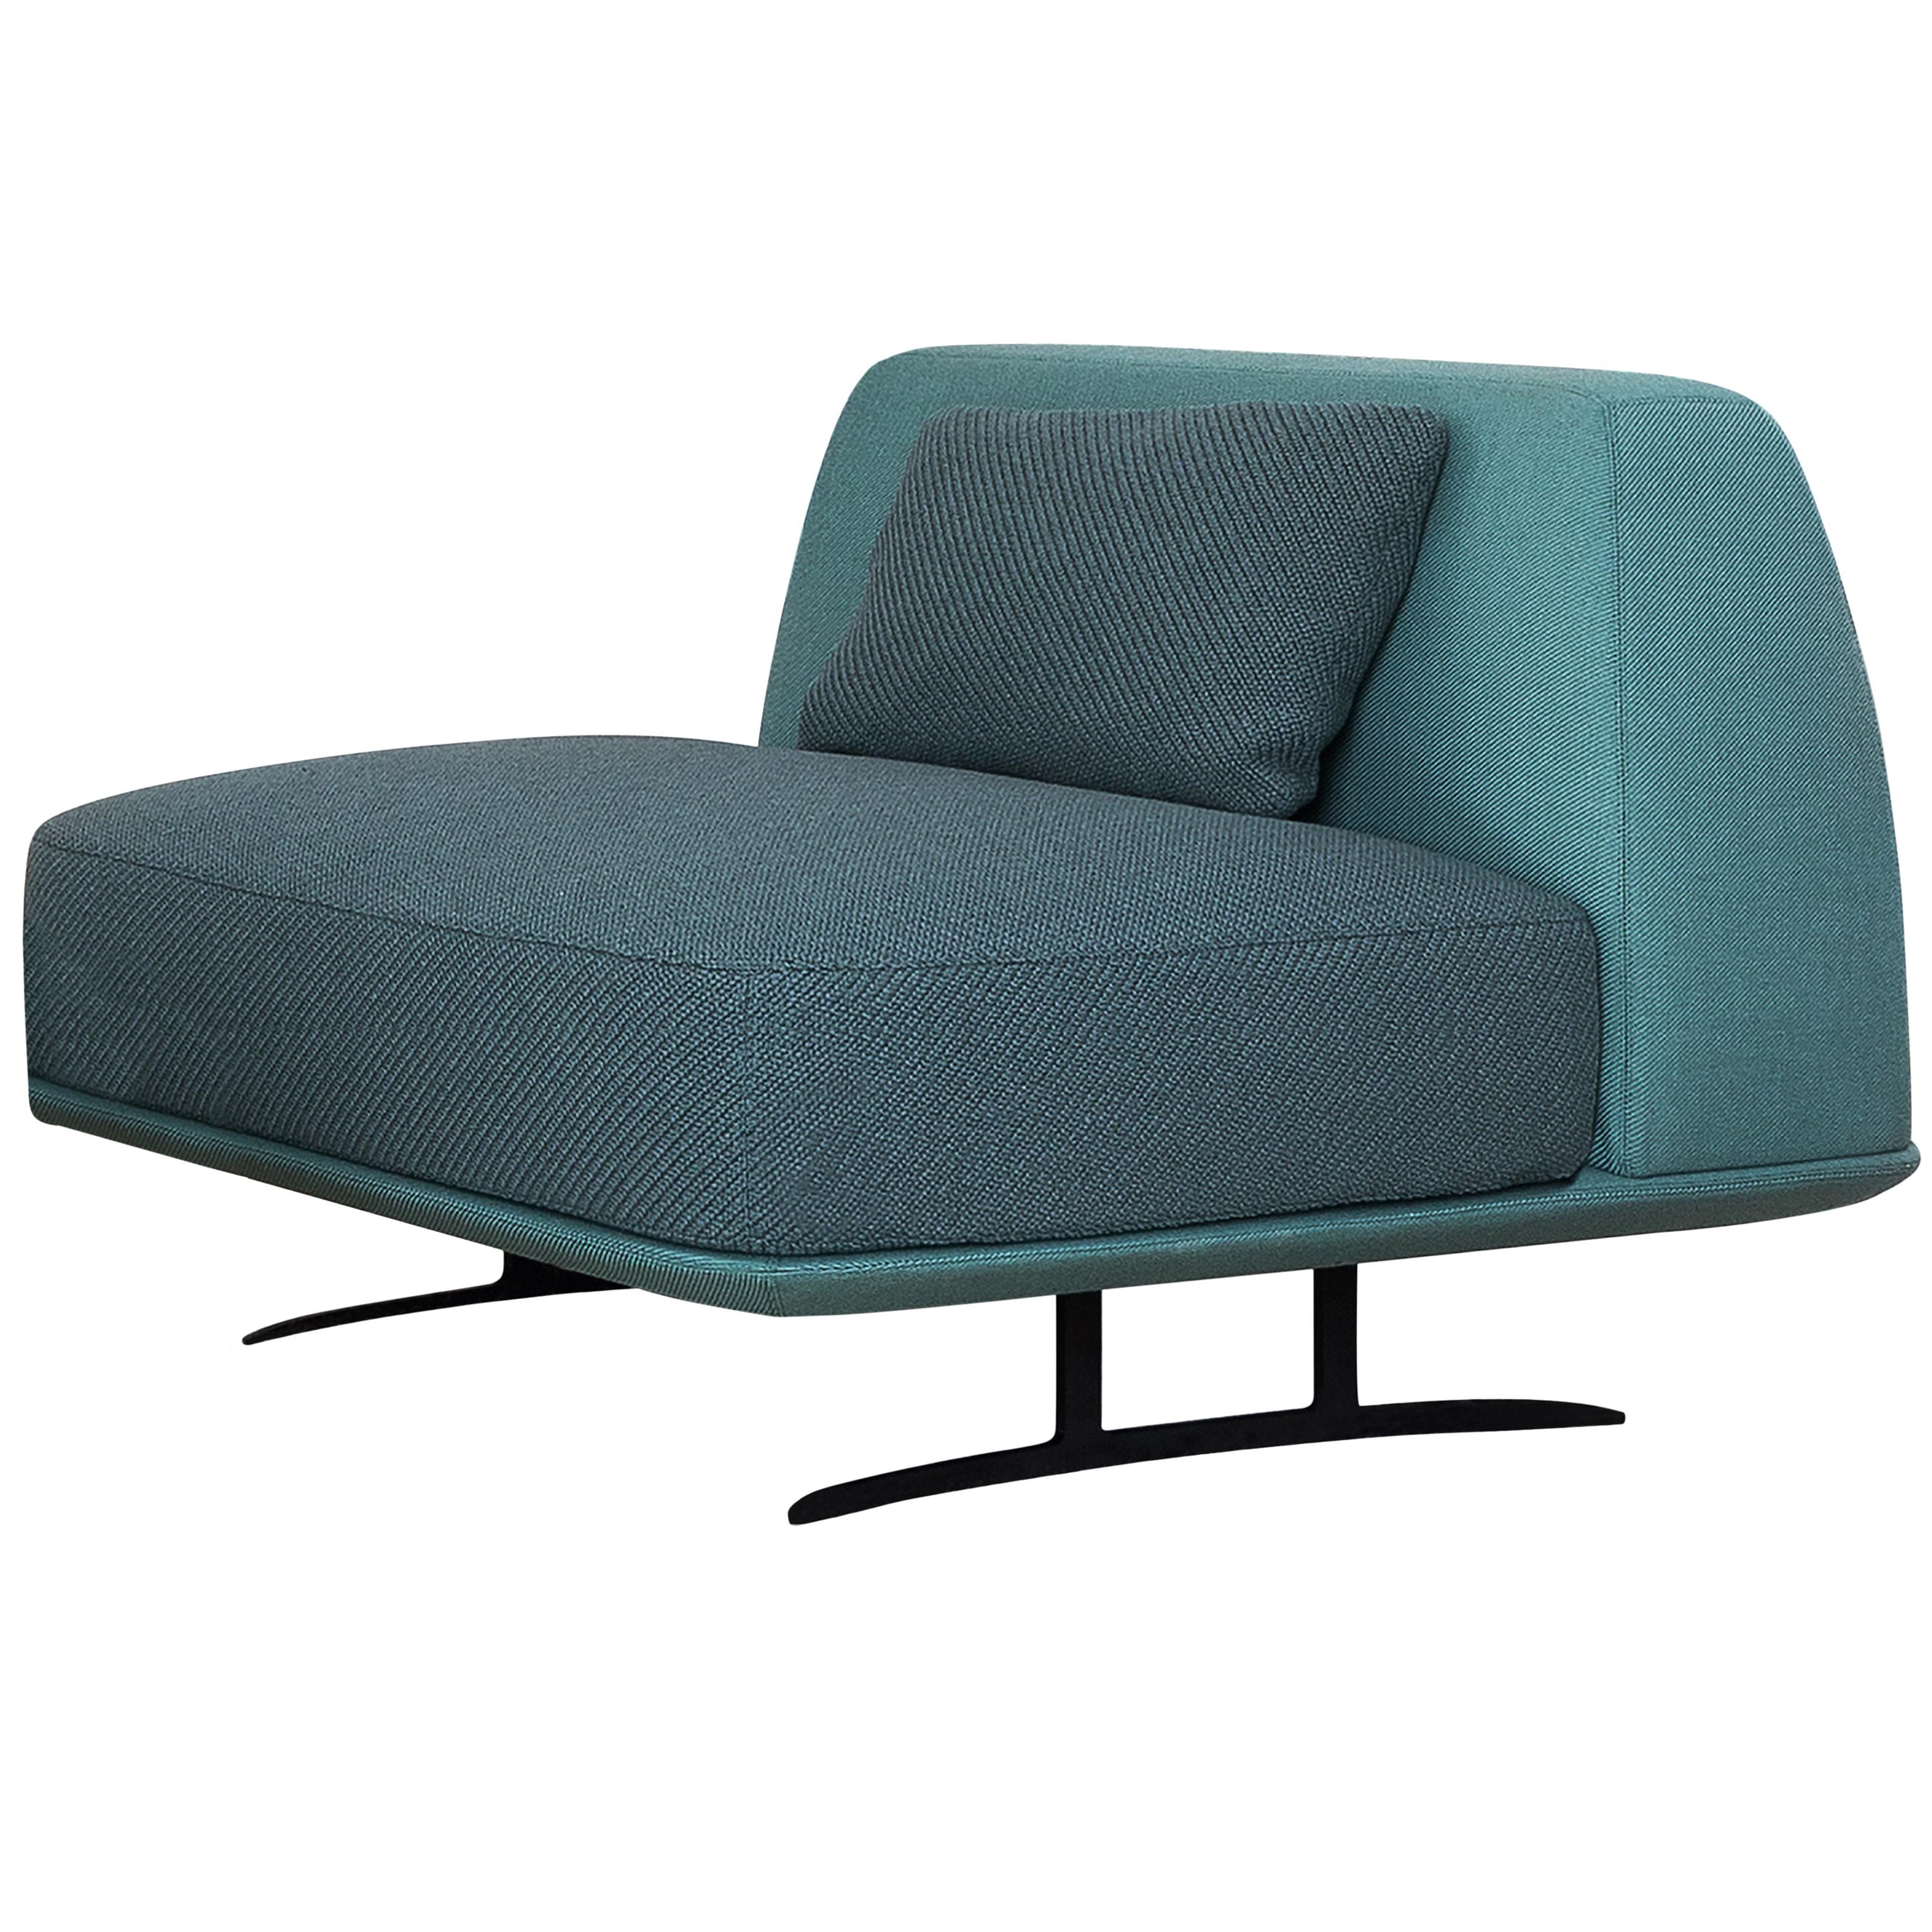 Baleri Italia Trays Armchair in Blue Fabric by Parisotto + Formenton